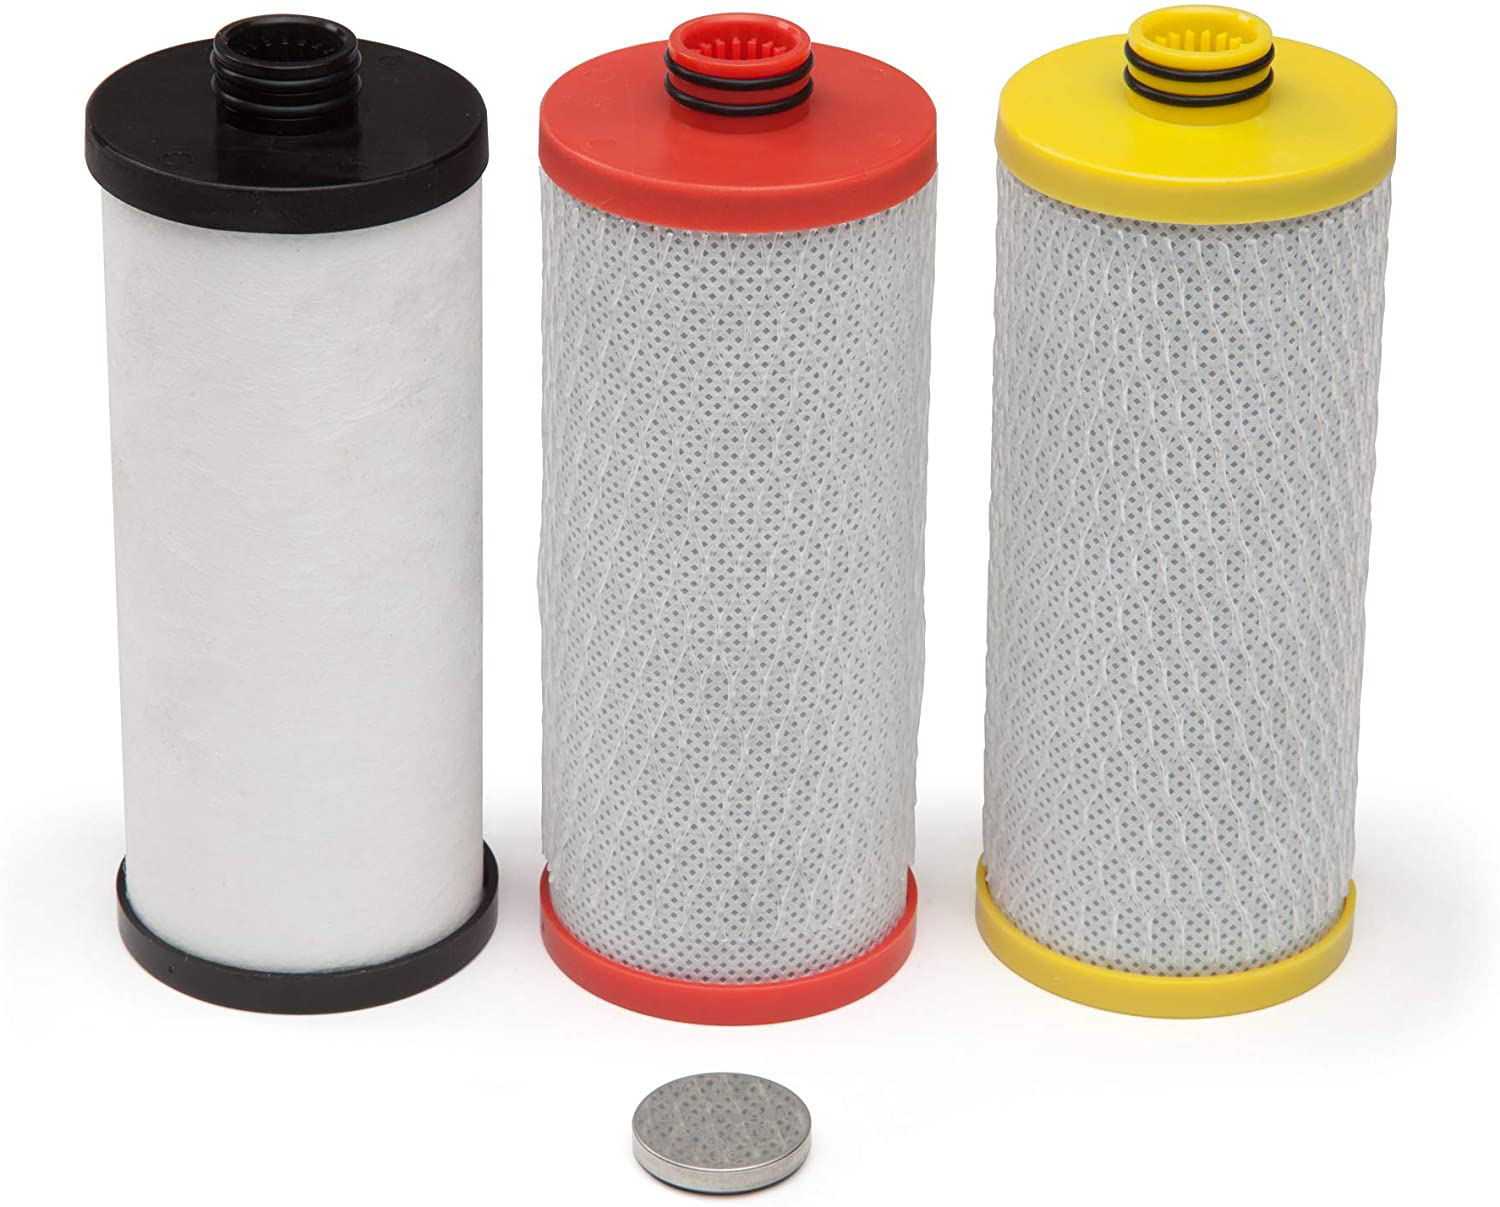 Aquasana AQ AQ-5300R 3-Stage Under Sink Water Filter Replacement Cartridges, Pack, Red, Yellow,/Black